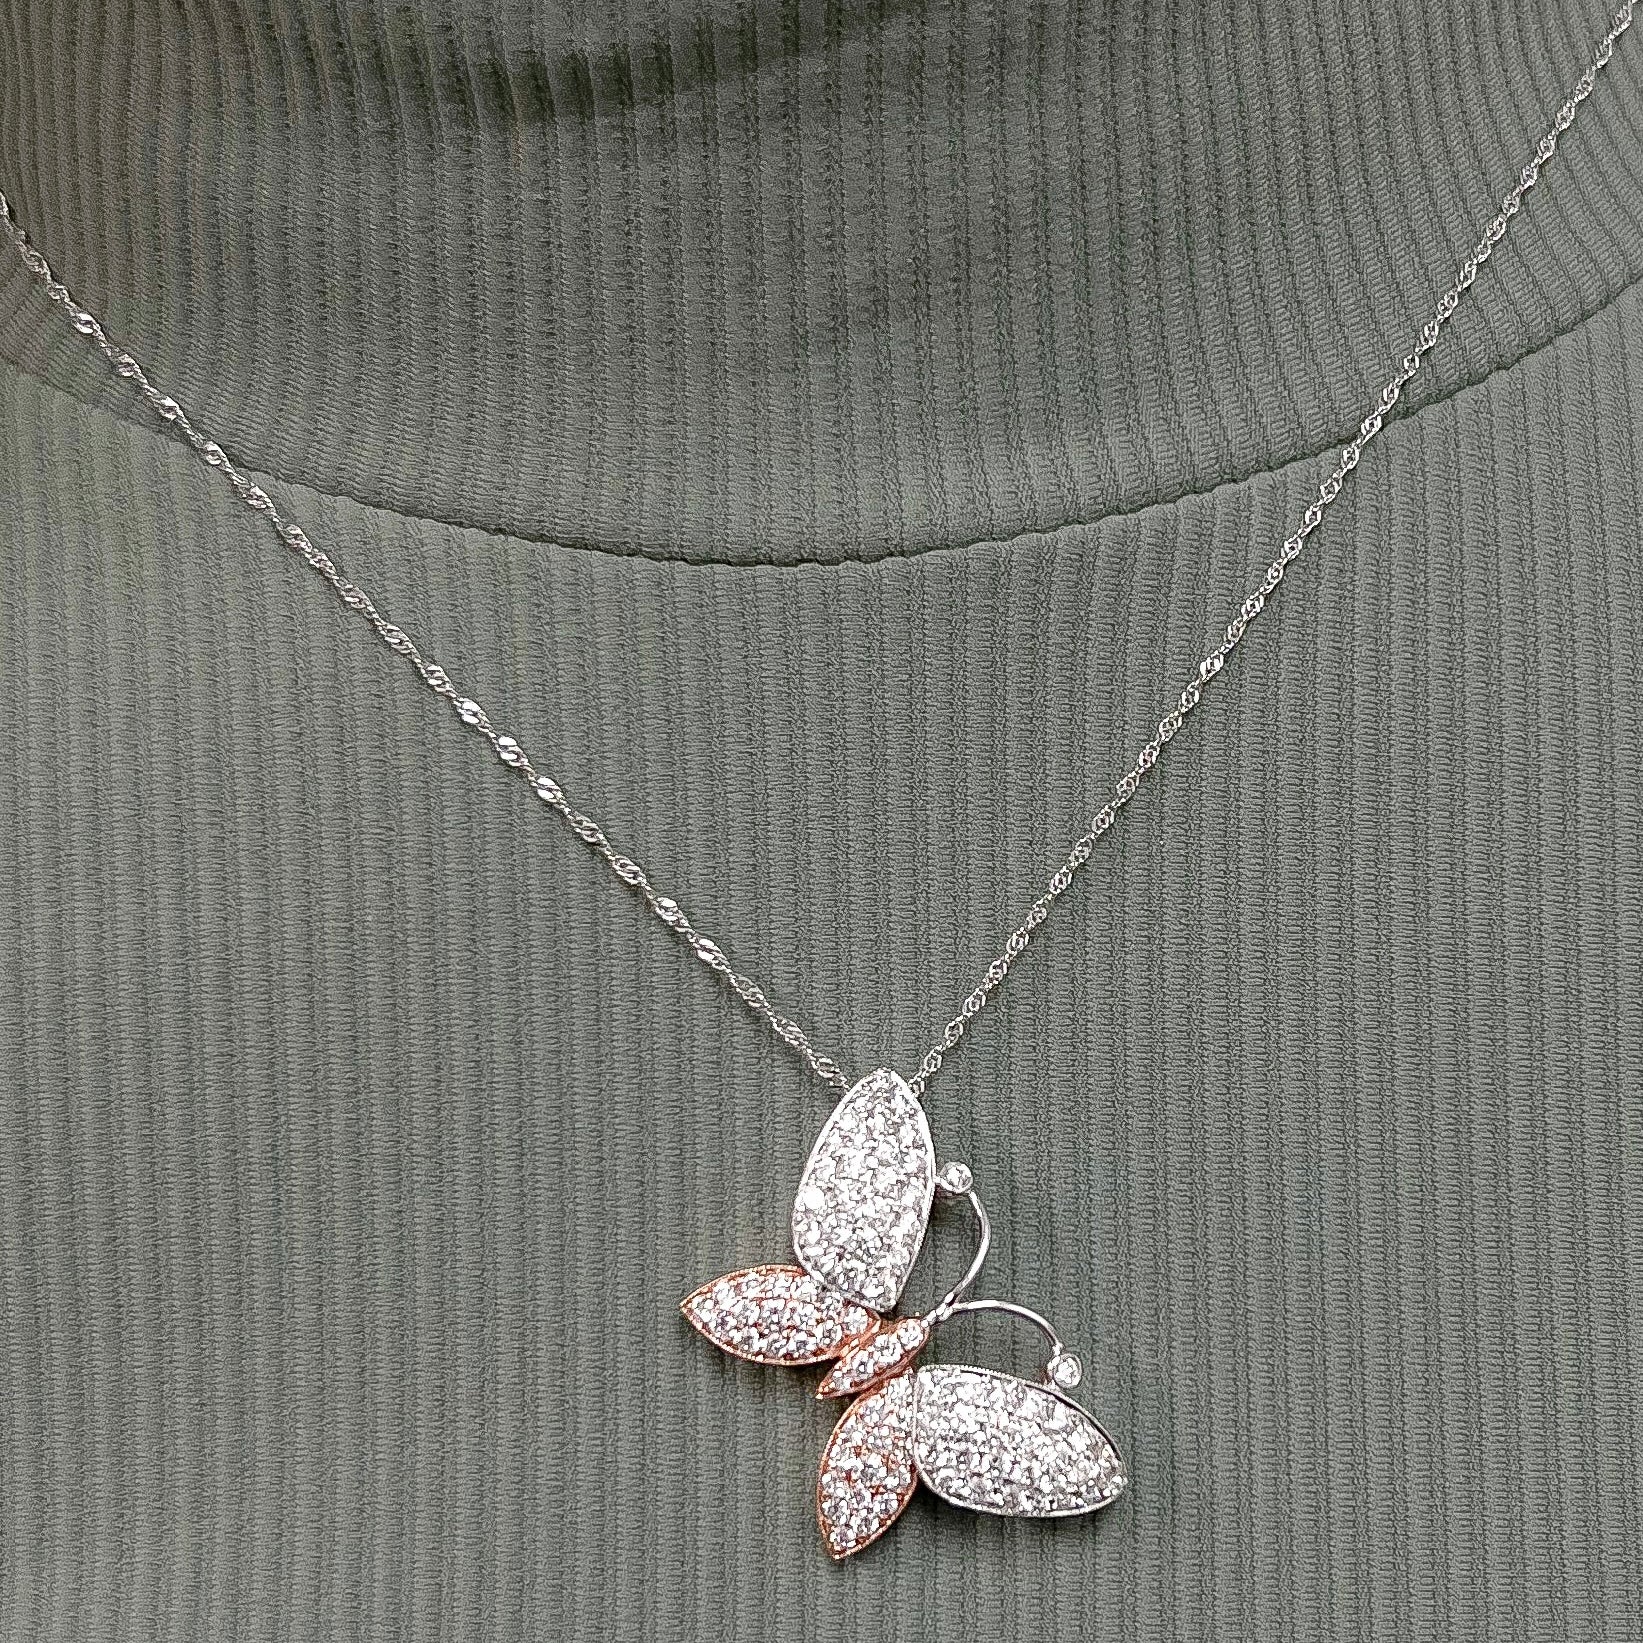 
  
  14k Two Tone White and Rose Gold  Diamond Butterfly Pendant Necklace
  
